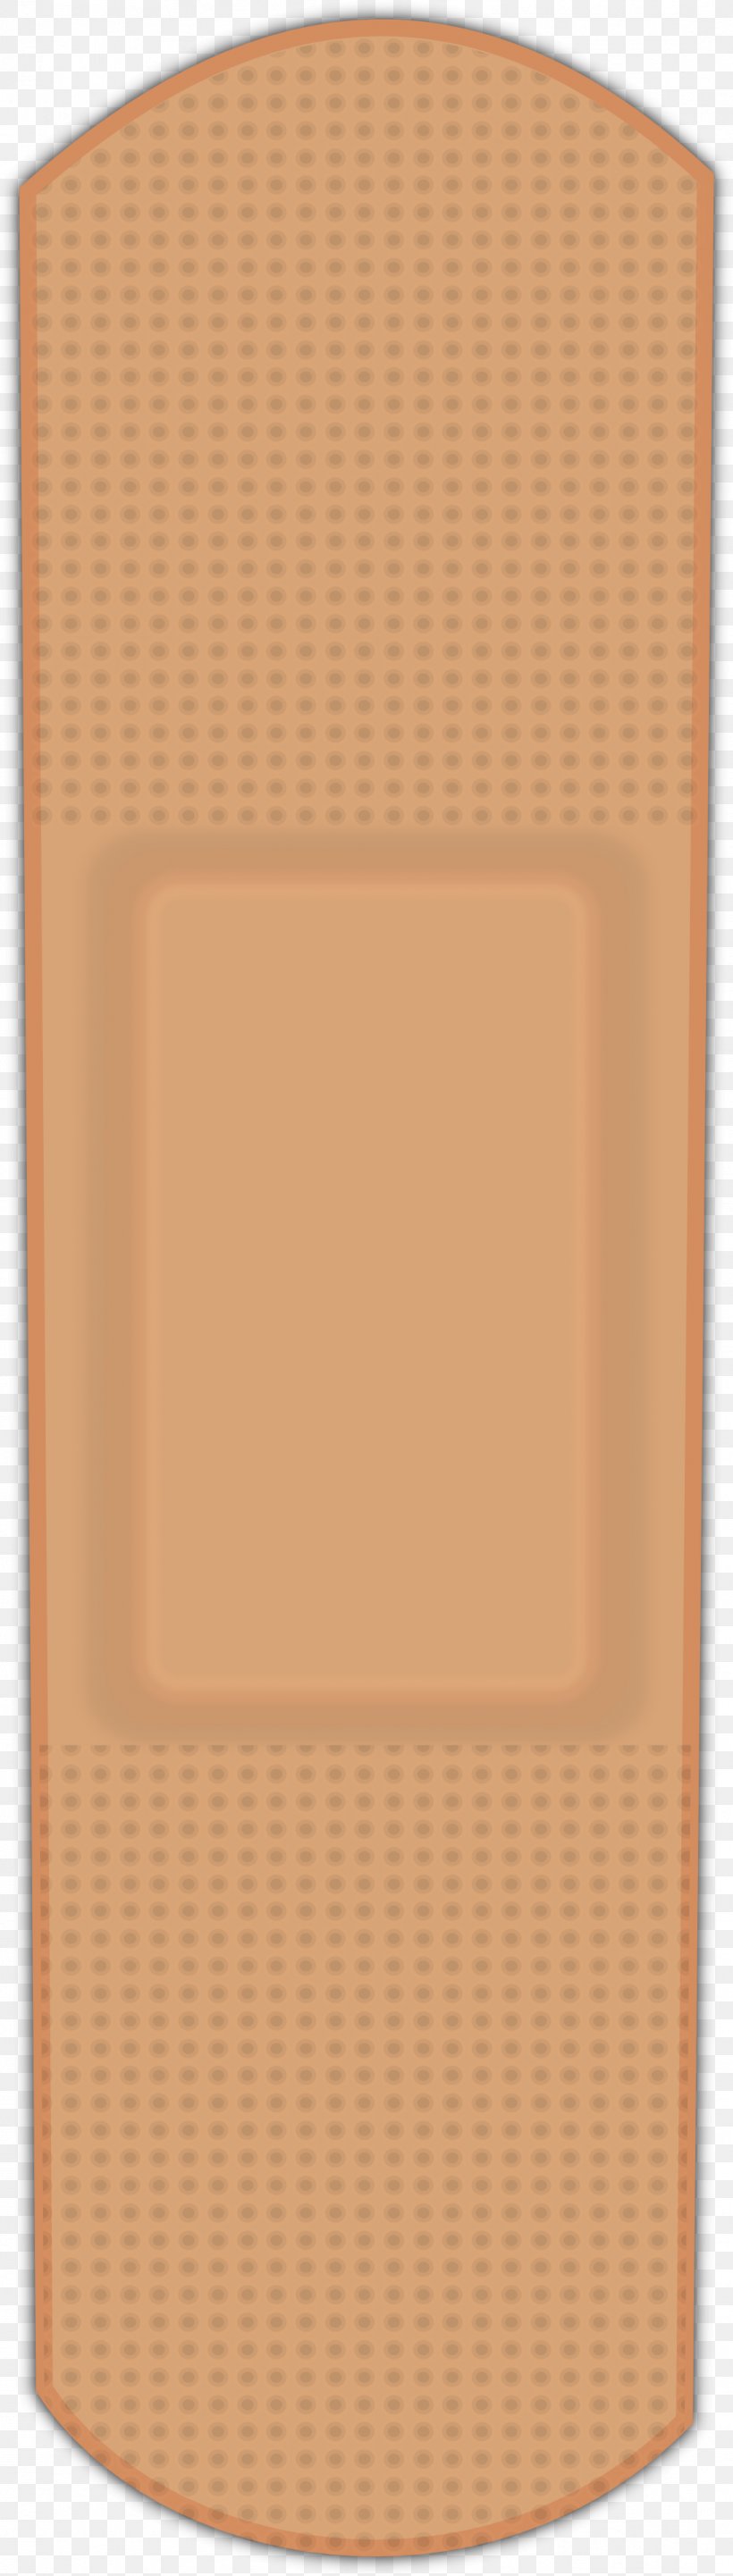 Wood Stain Varnish Angle, PNG, 1092x3840px, Wood Stain, Brown, Peach, Rectangle, Varnish Download Free